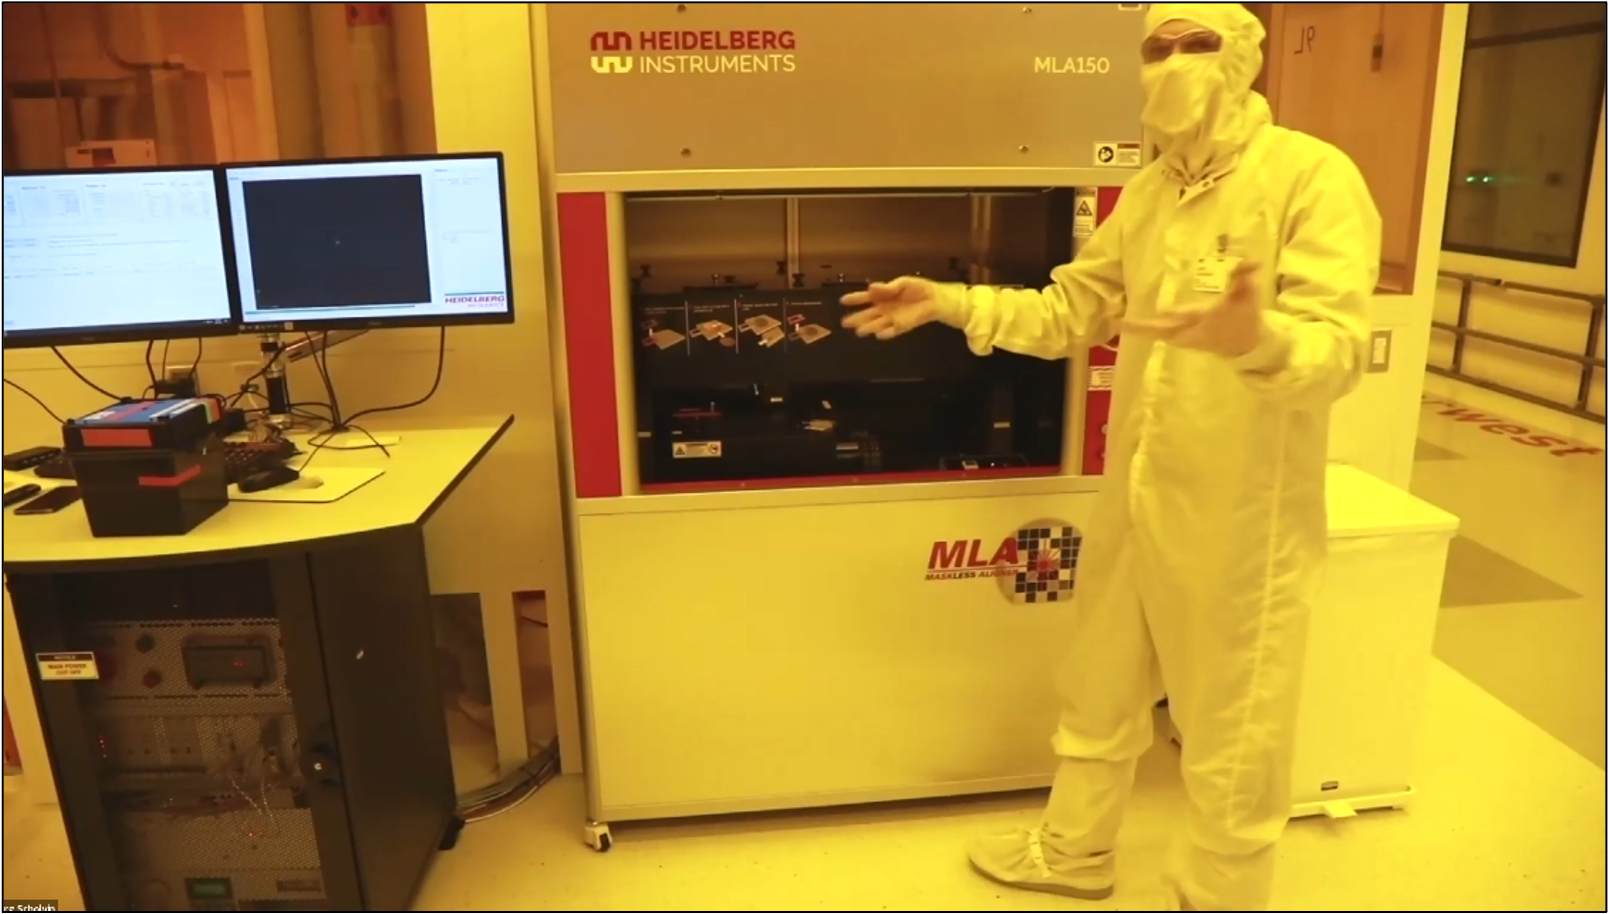 Scholvin explains the operation principle of the MLA tool while the coated wafer is being exposed using a 405 nanometer blue laser.